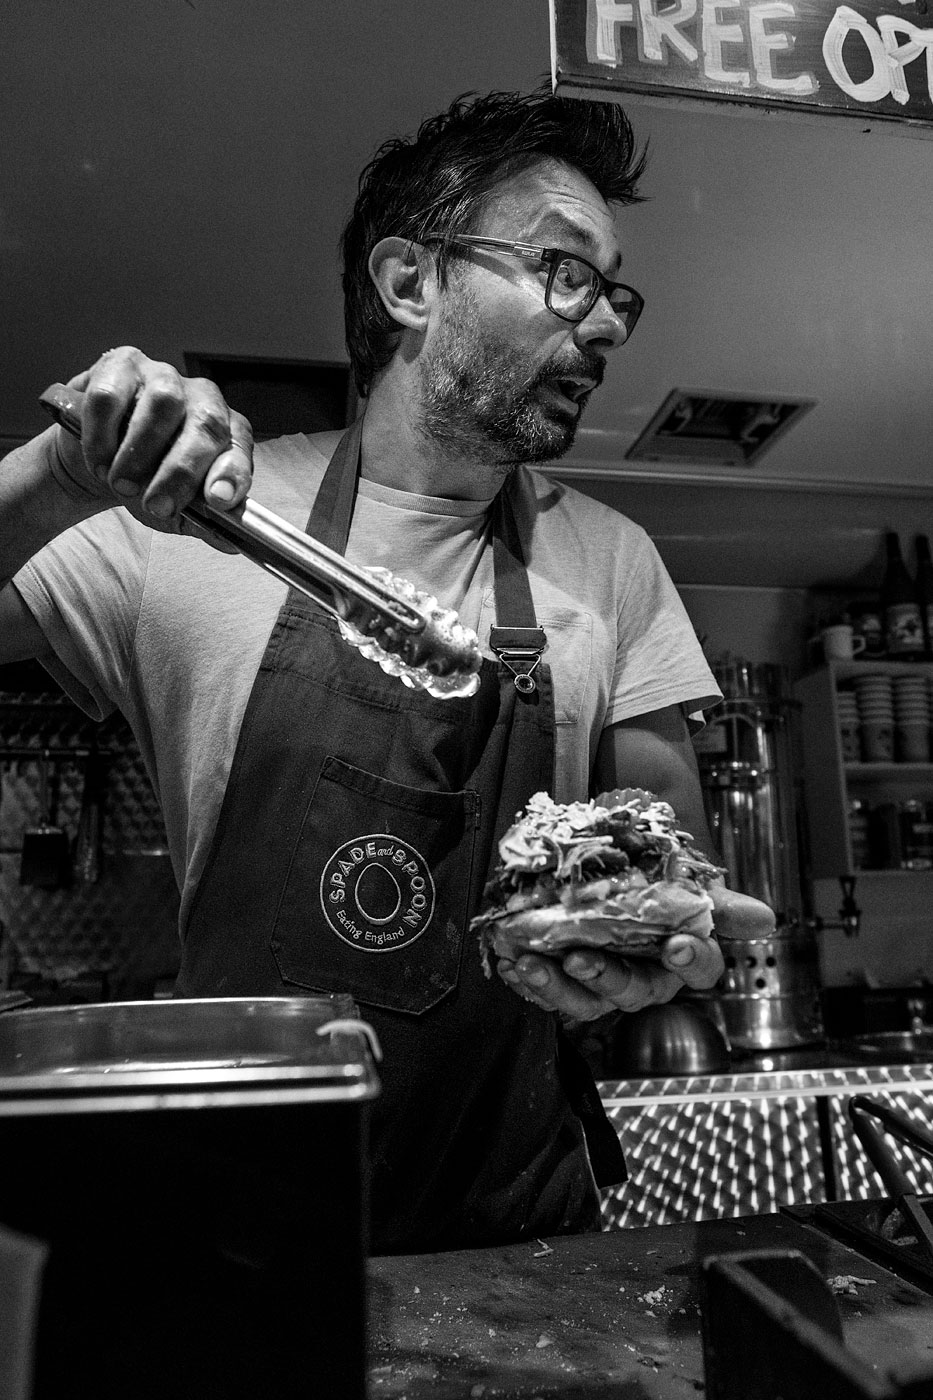 Spade an Spoon serving pulled pork at the Spiegle Tent Brighton UK, black and white social documentary portrait of man at work. ©P. Maton 2017 eyeteeth.net 